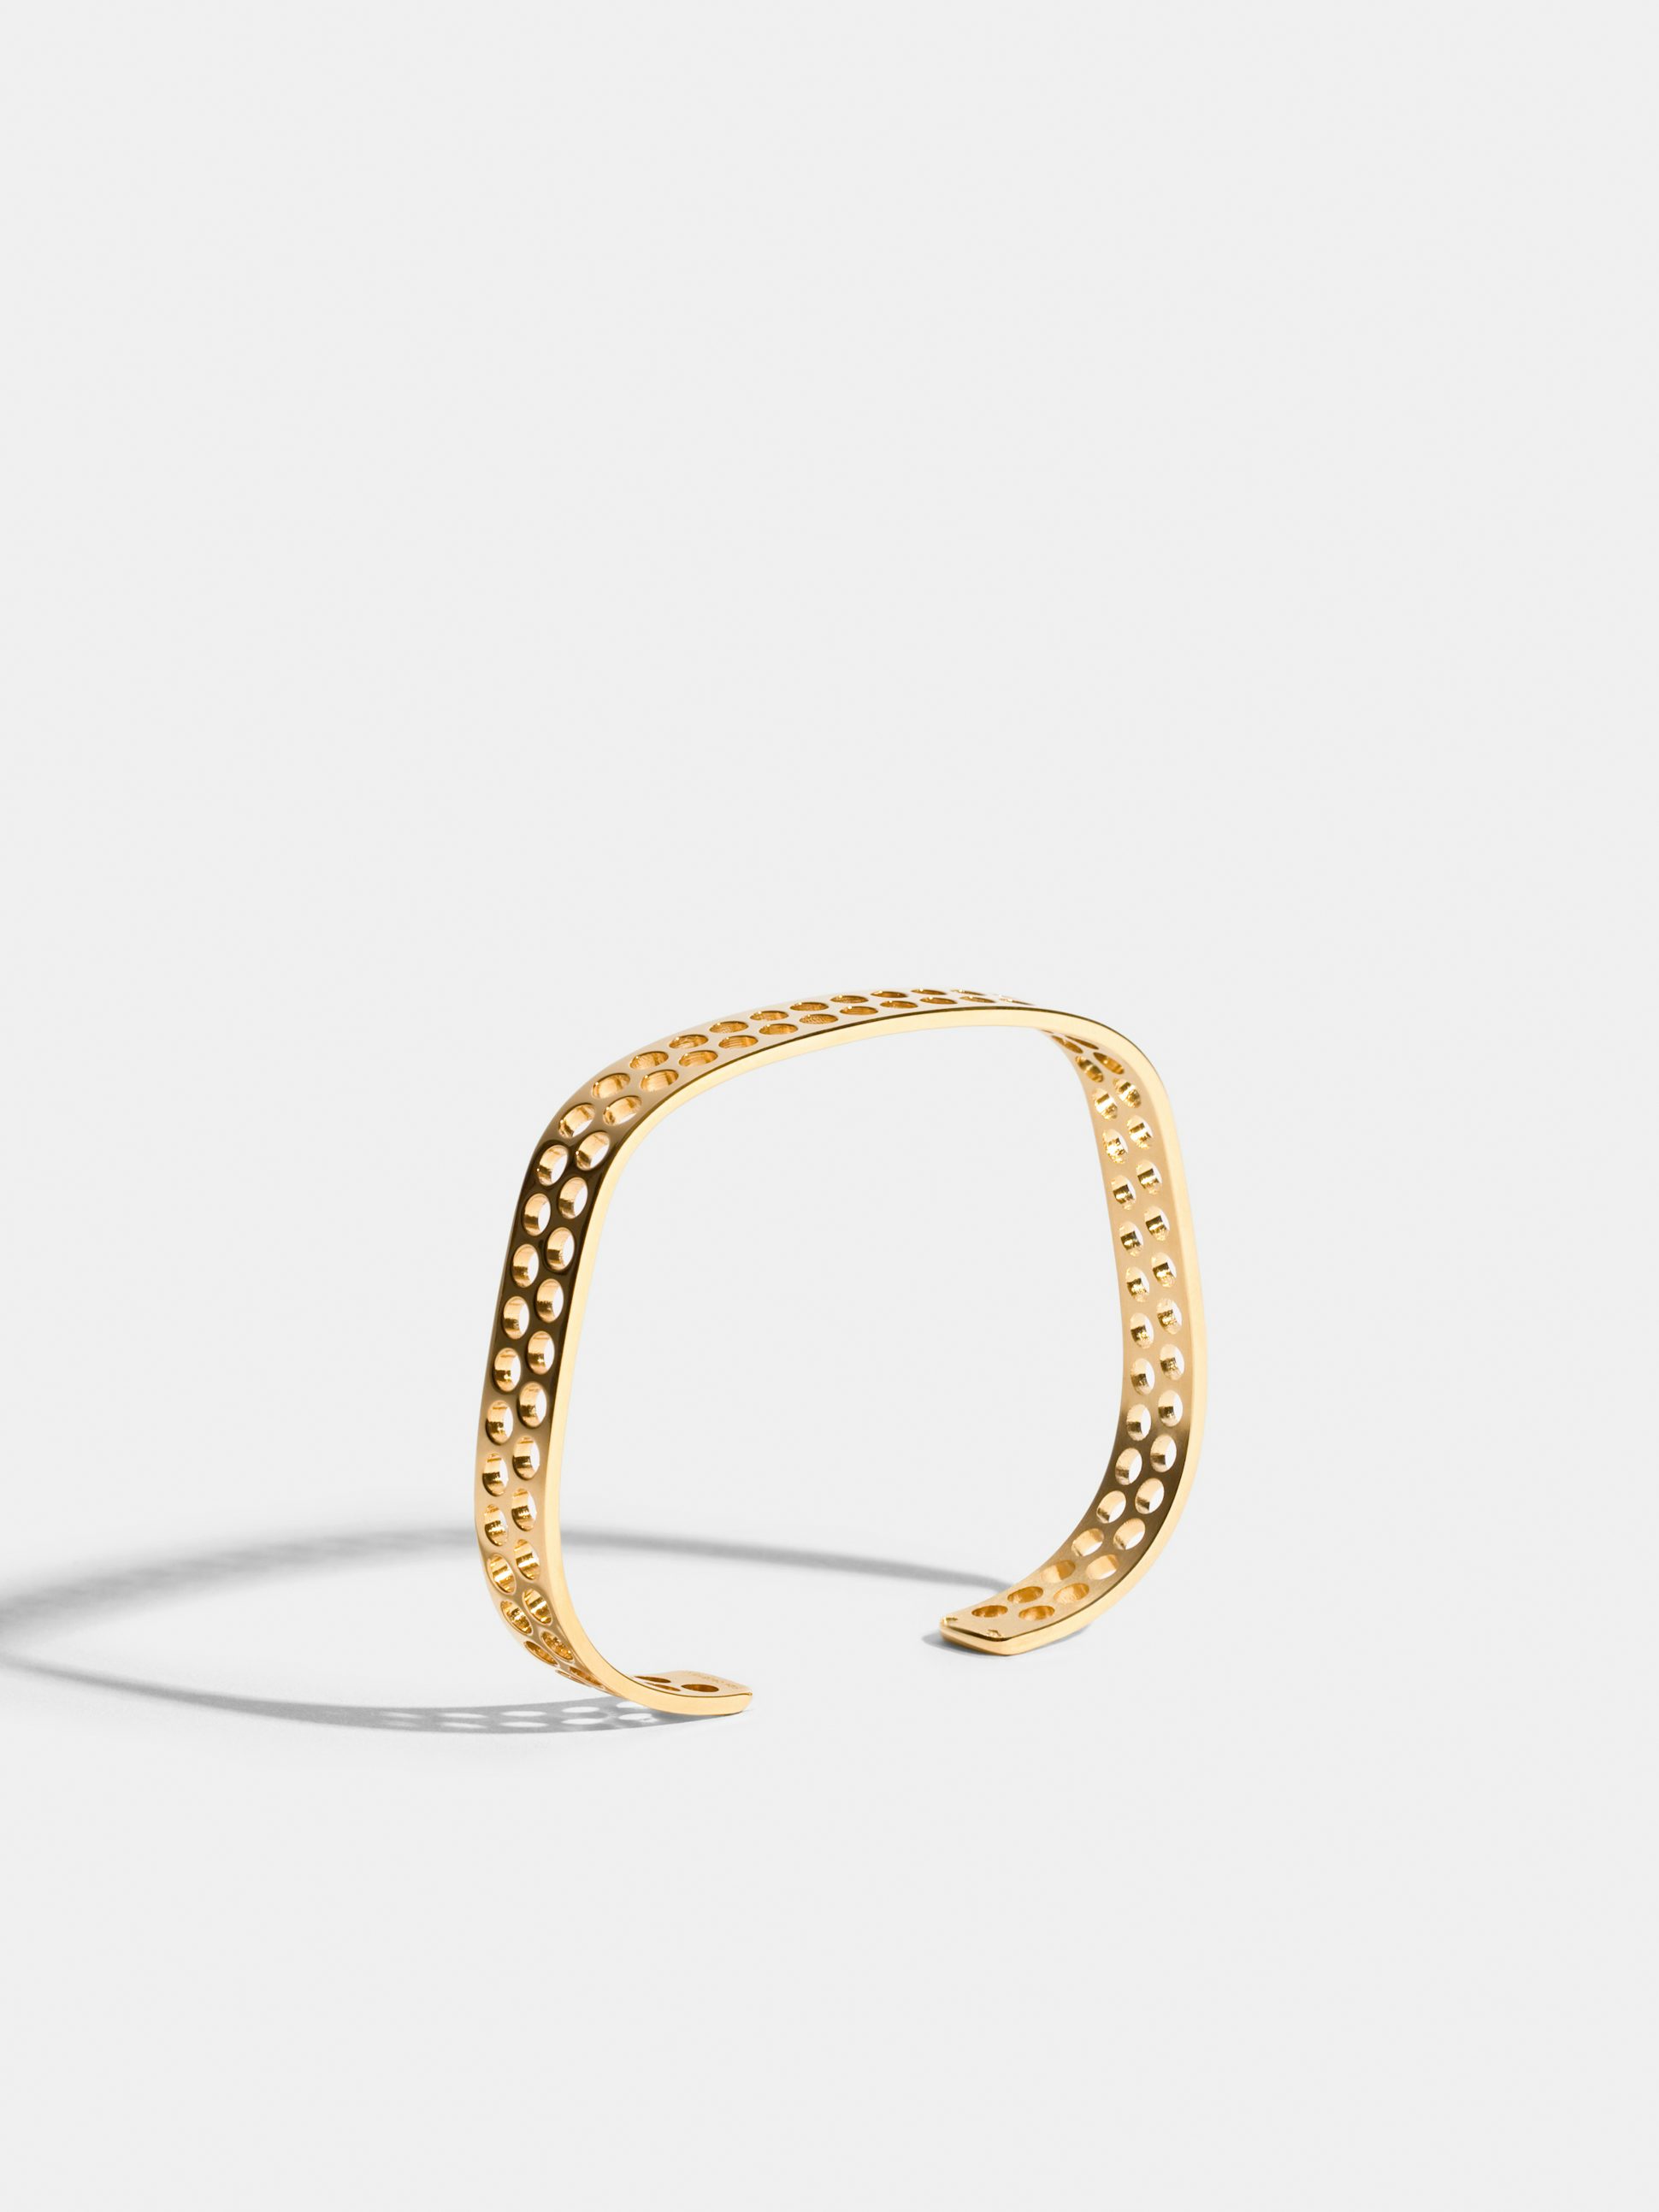 Voids, JEM by India Mahdavi, bracelet IV in 18k Fairmined ethical yellow gold (2 rows, medium perforations)